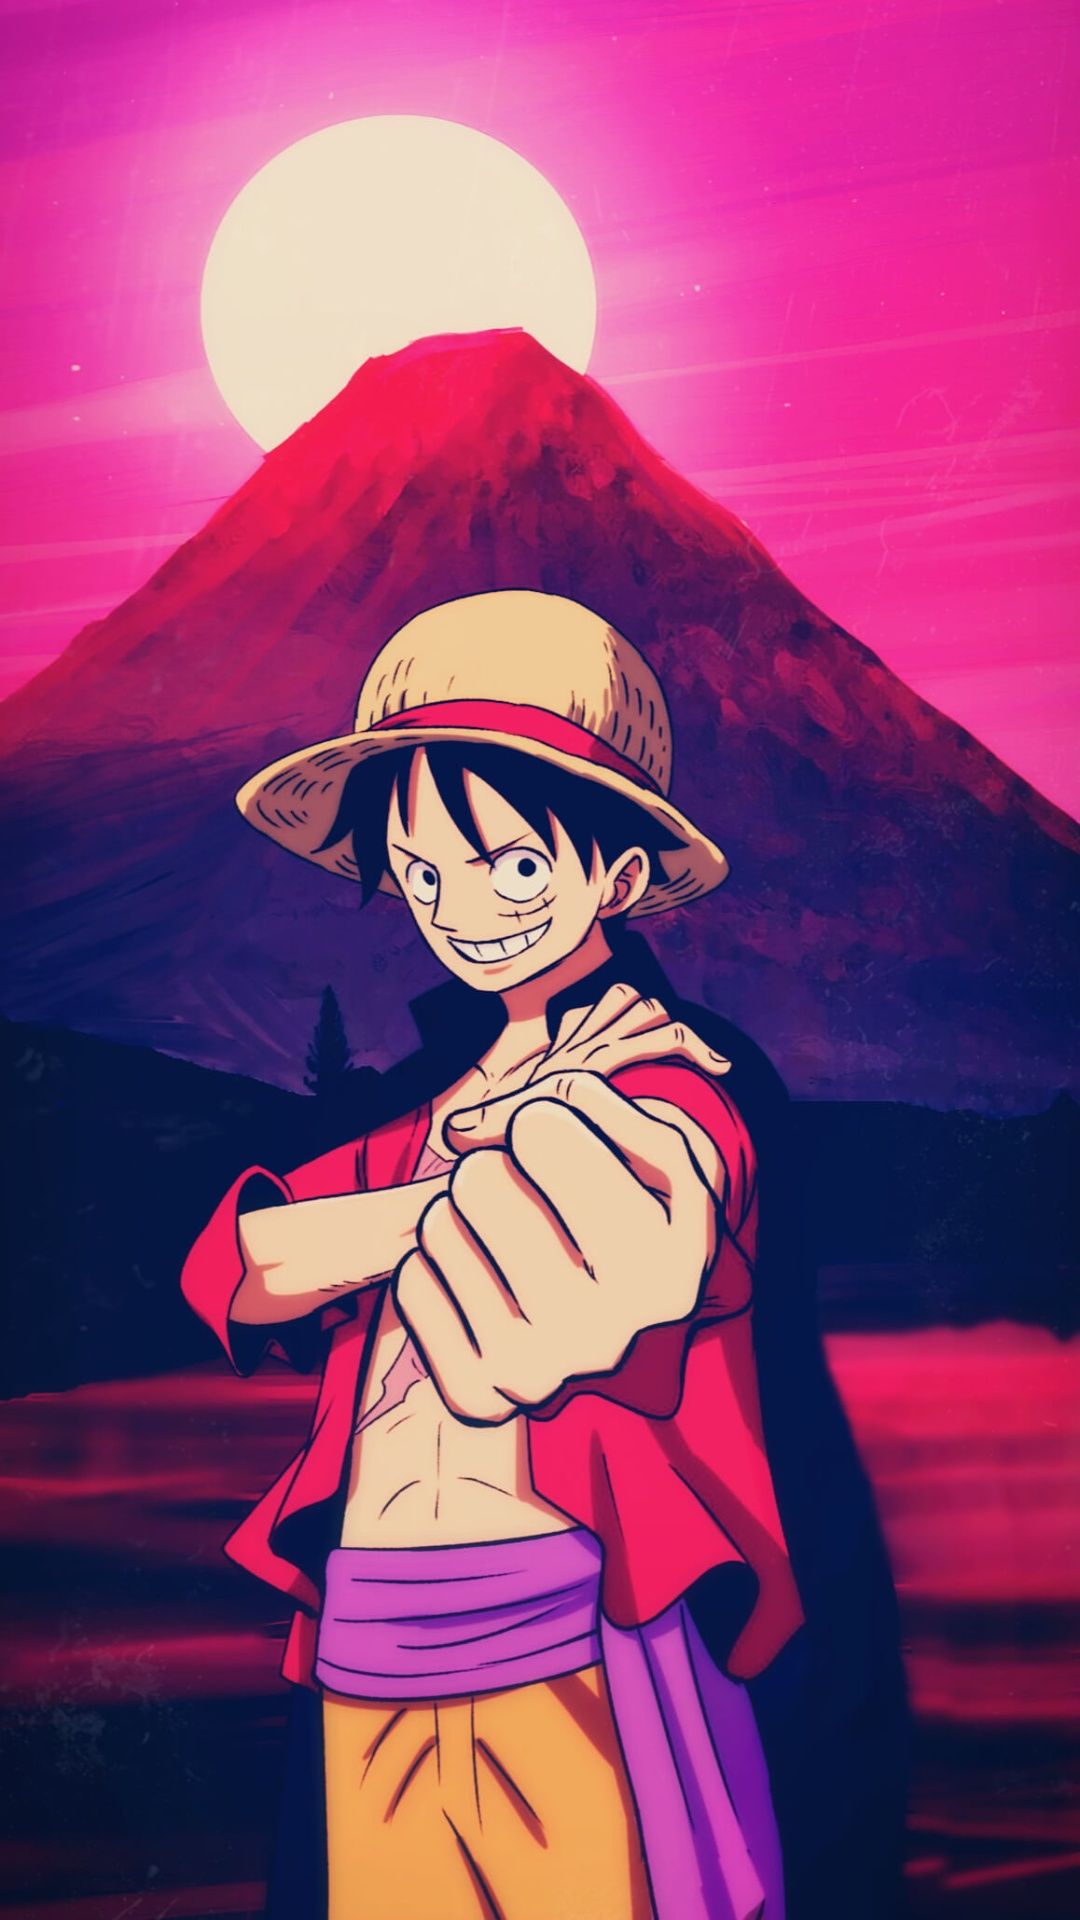 Monkey D. Luffy, the leader of the Straw Hat Pirates, is ready to embark on a new adventure. - One Piece